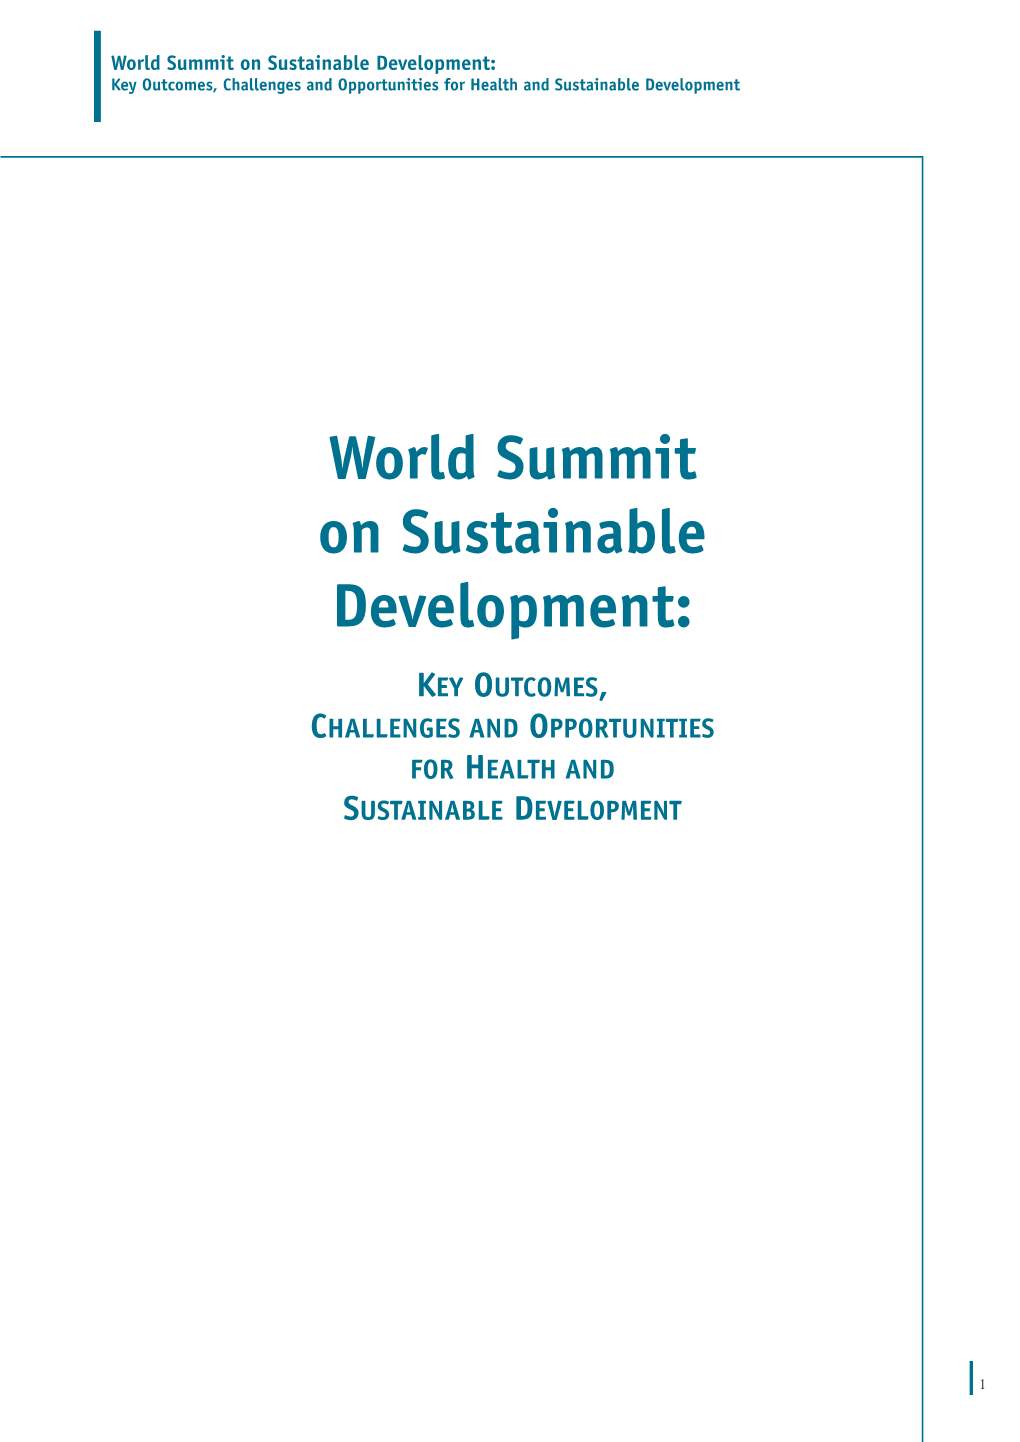 World Summit on Sustainable Development: Key Outcomes, Challenges and Opportunities for Health and Sustainable Development